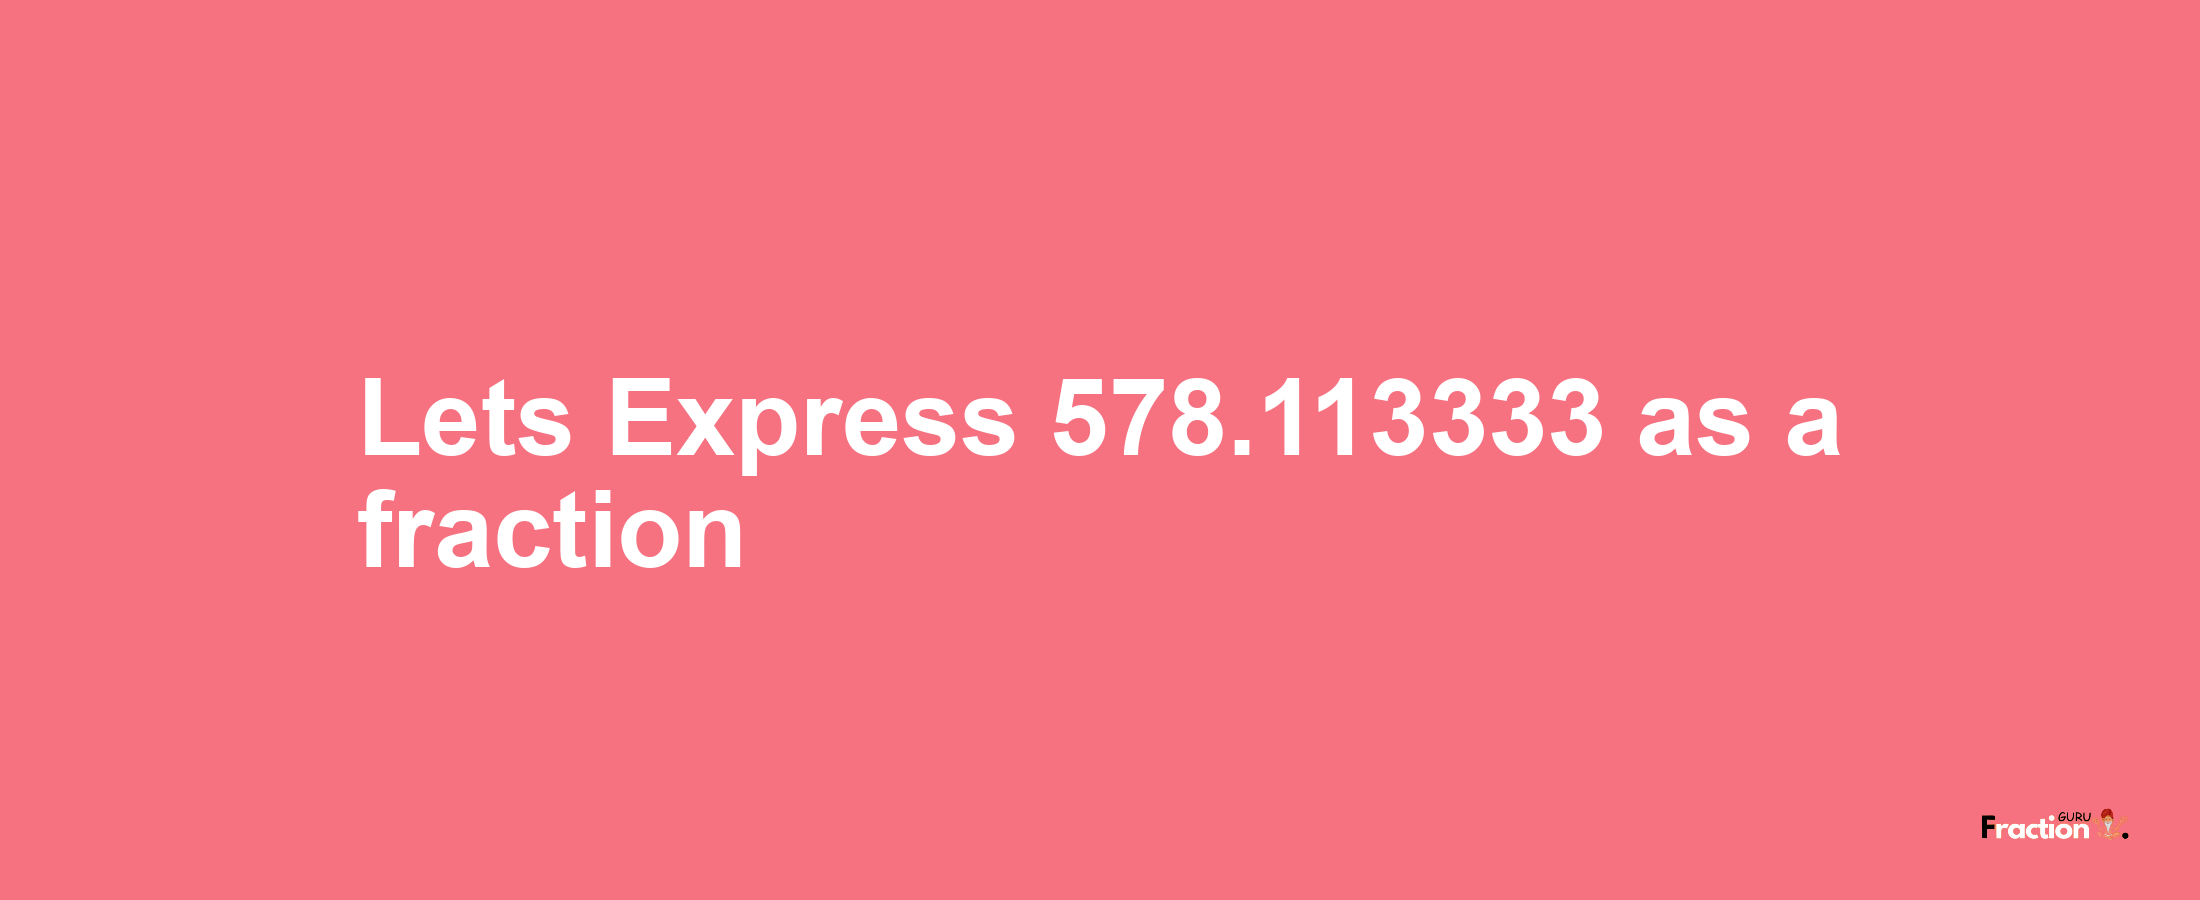 Lets Express 578.113333 as afraction